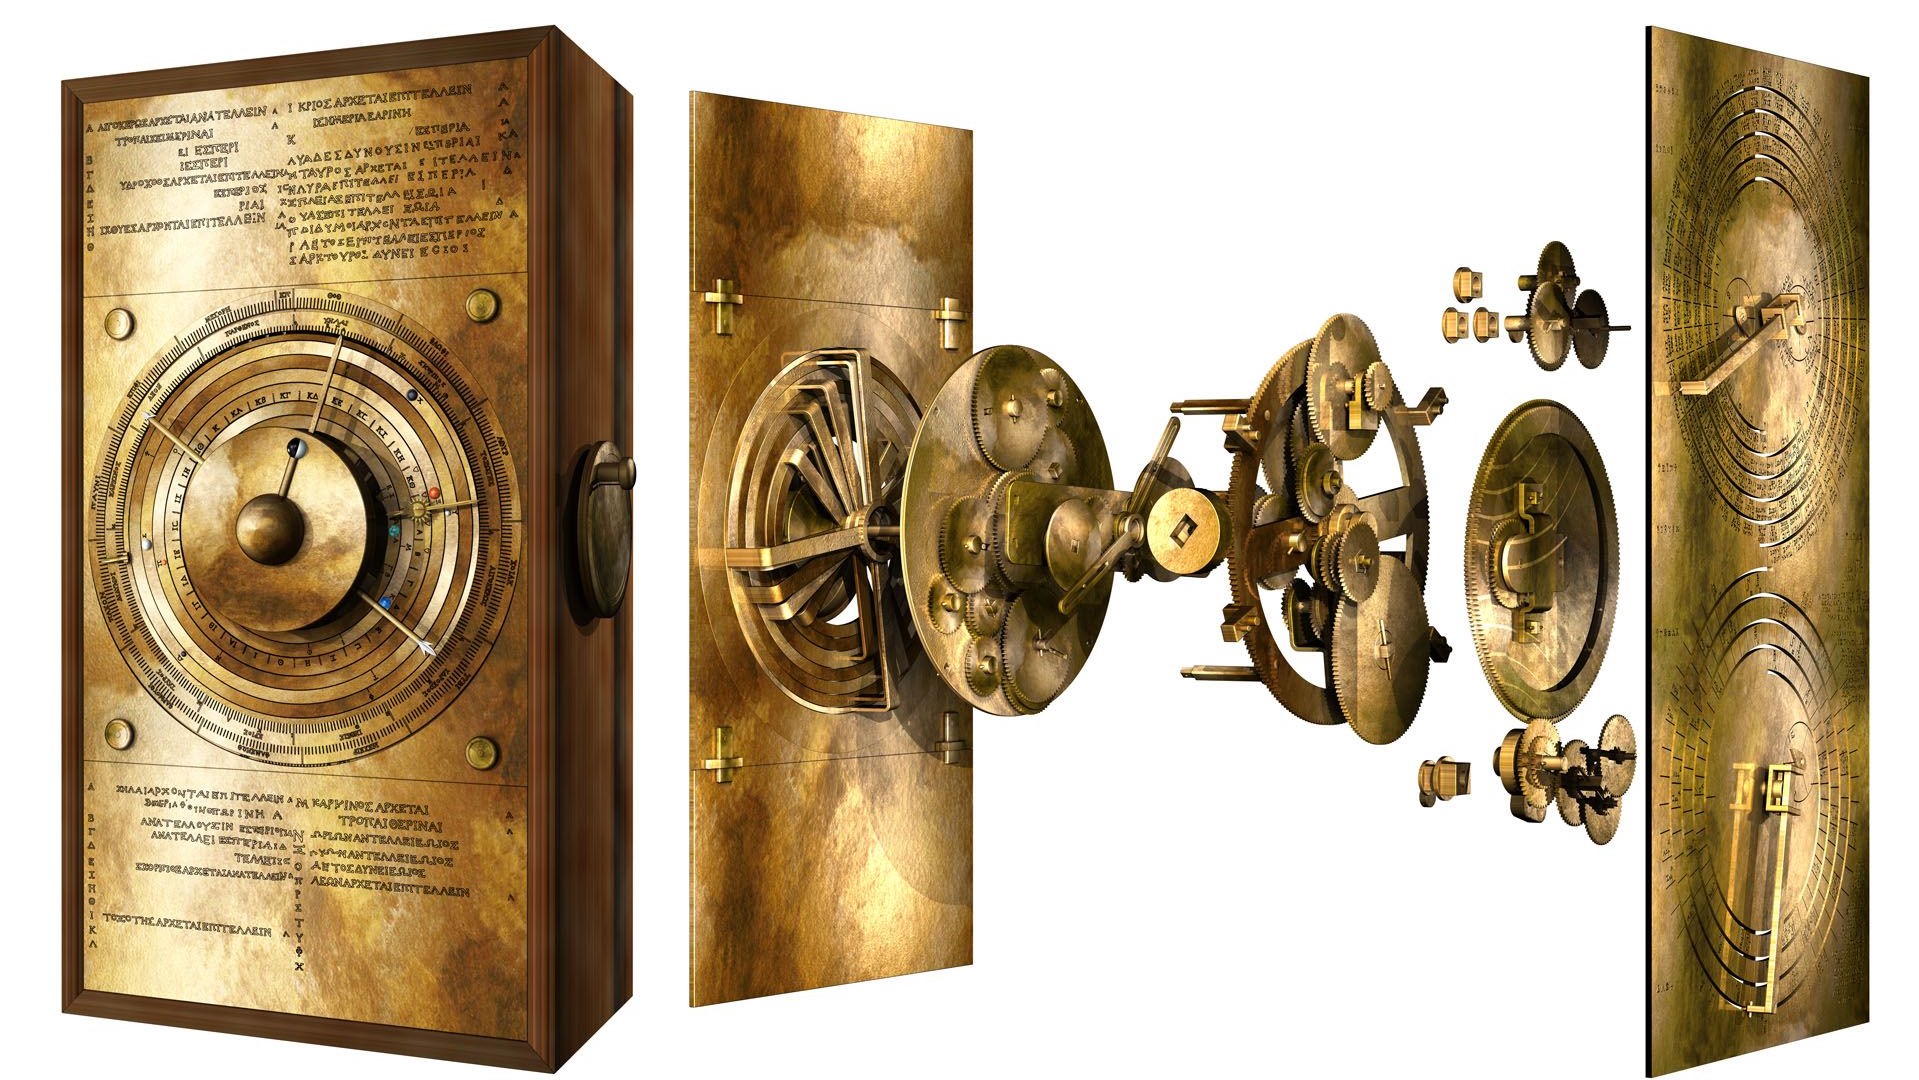 An 'exploded' view of the Antikythera mechanism.